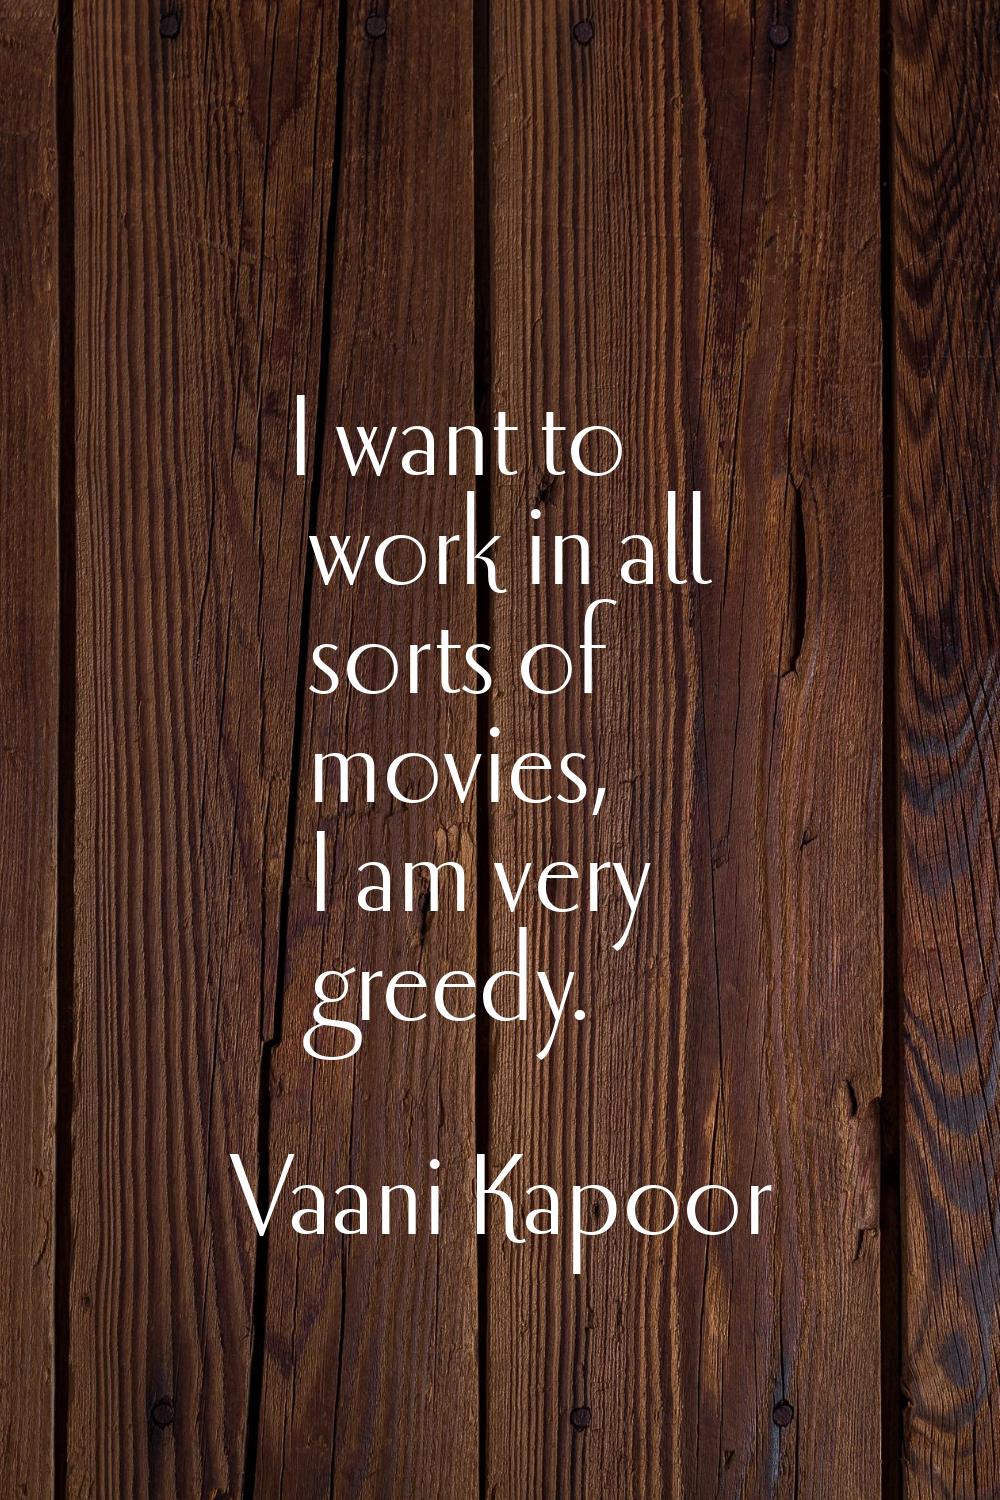 I want to work in all sorts of movies, I am very greedy.